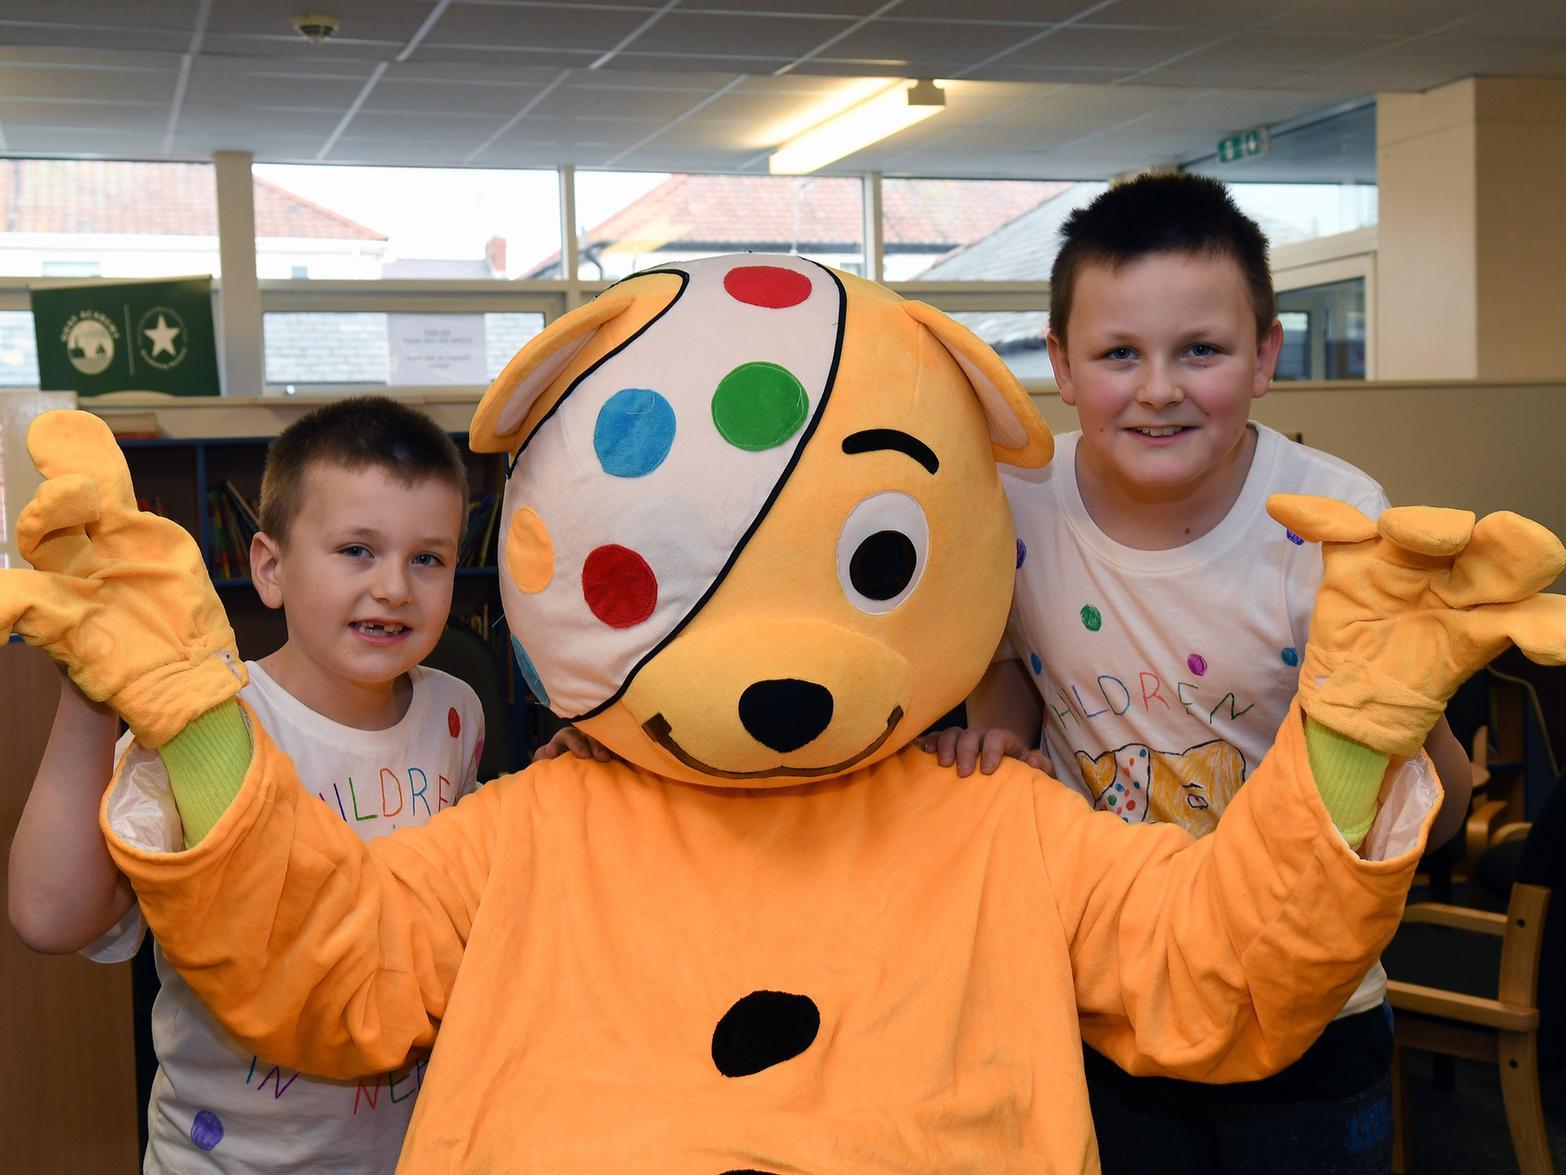 Brothers Leighton and Harvey meet Pudsey at Quay Academy School. Pictures by Paul Atkinson: NBFP PA1946-9c